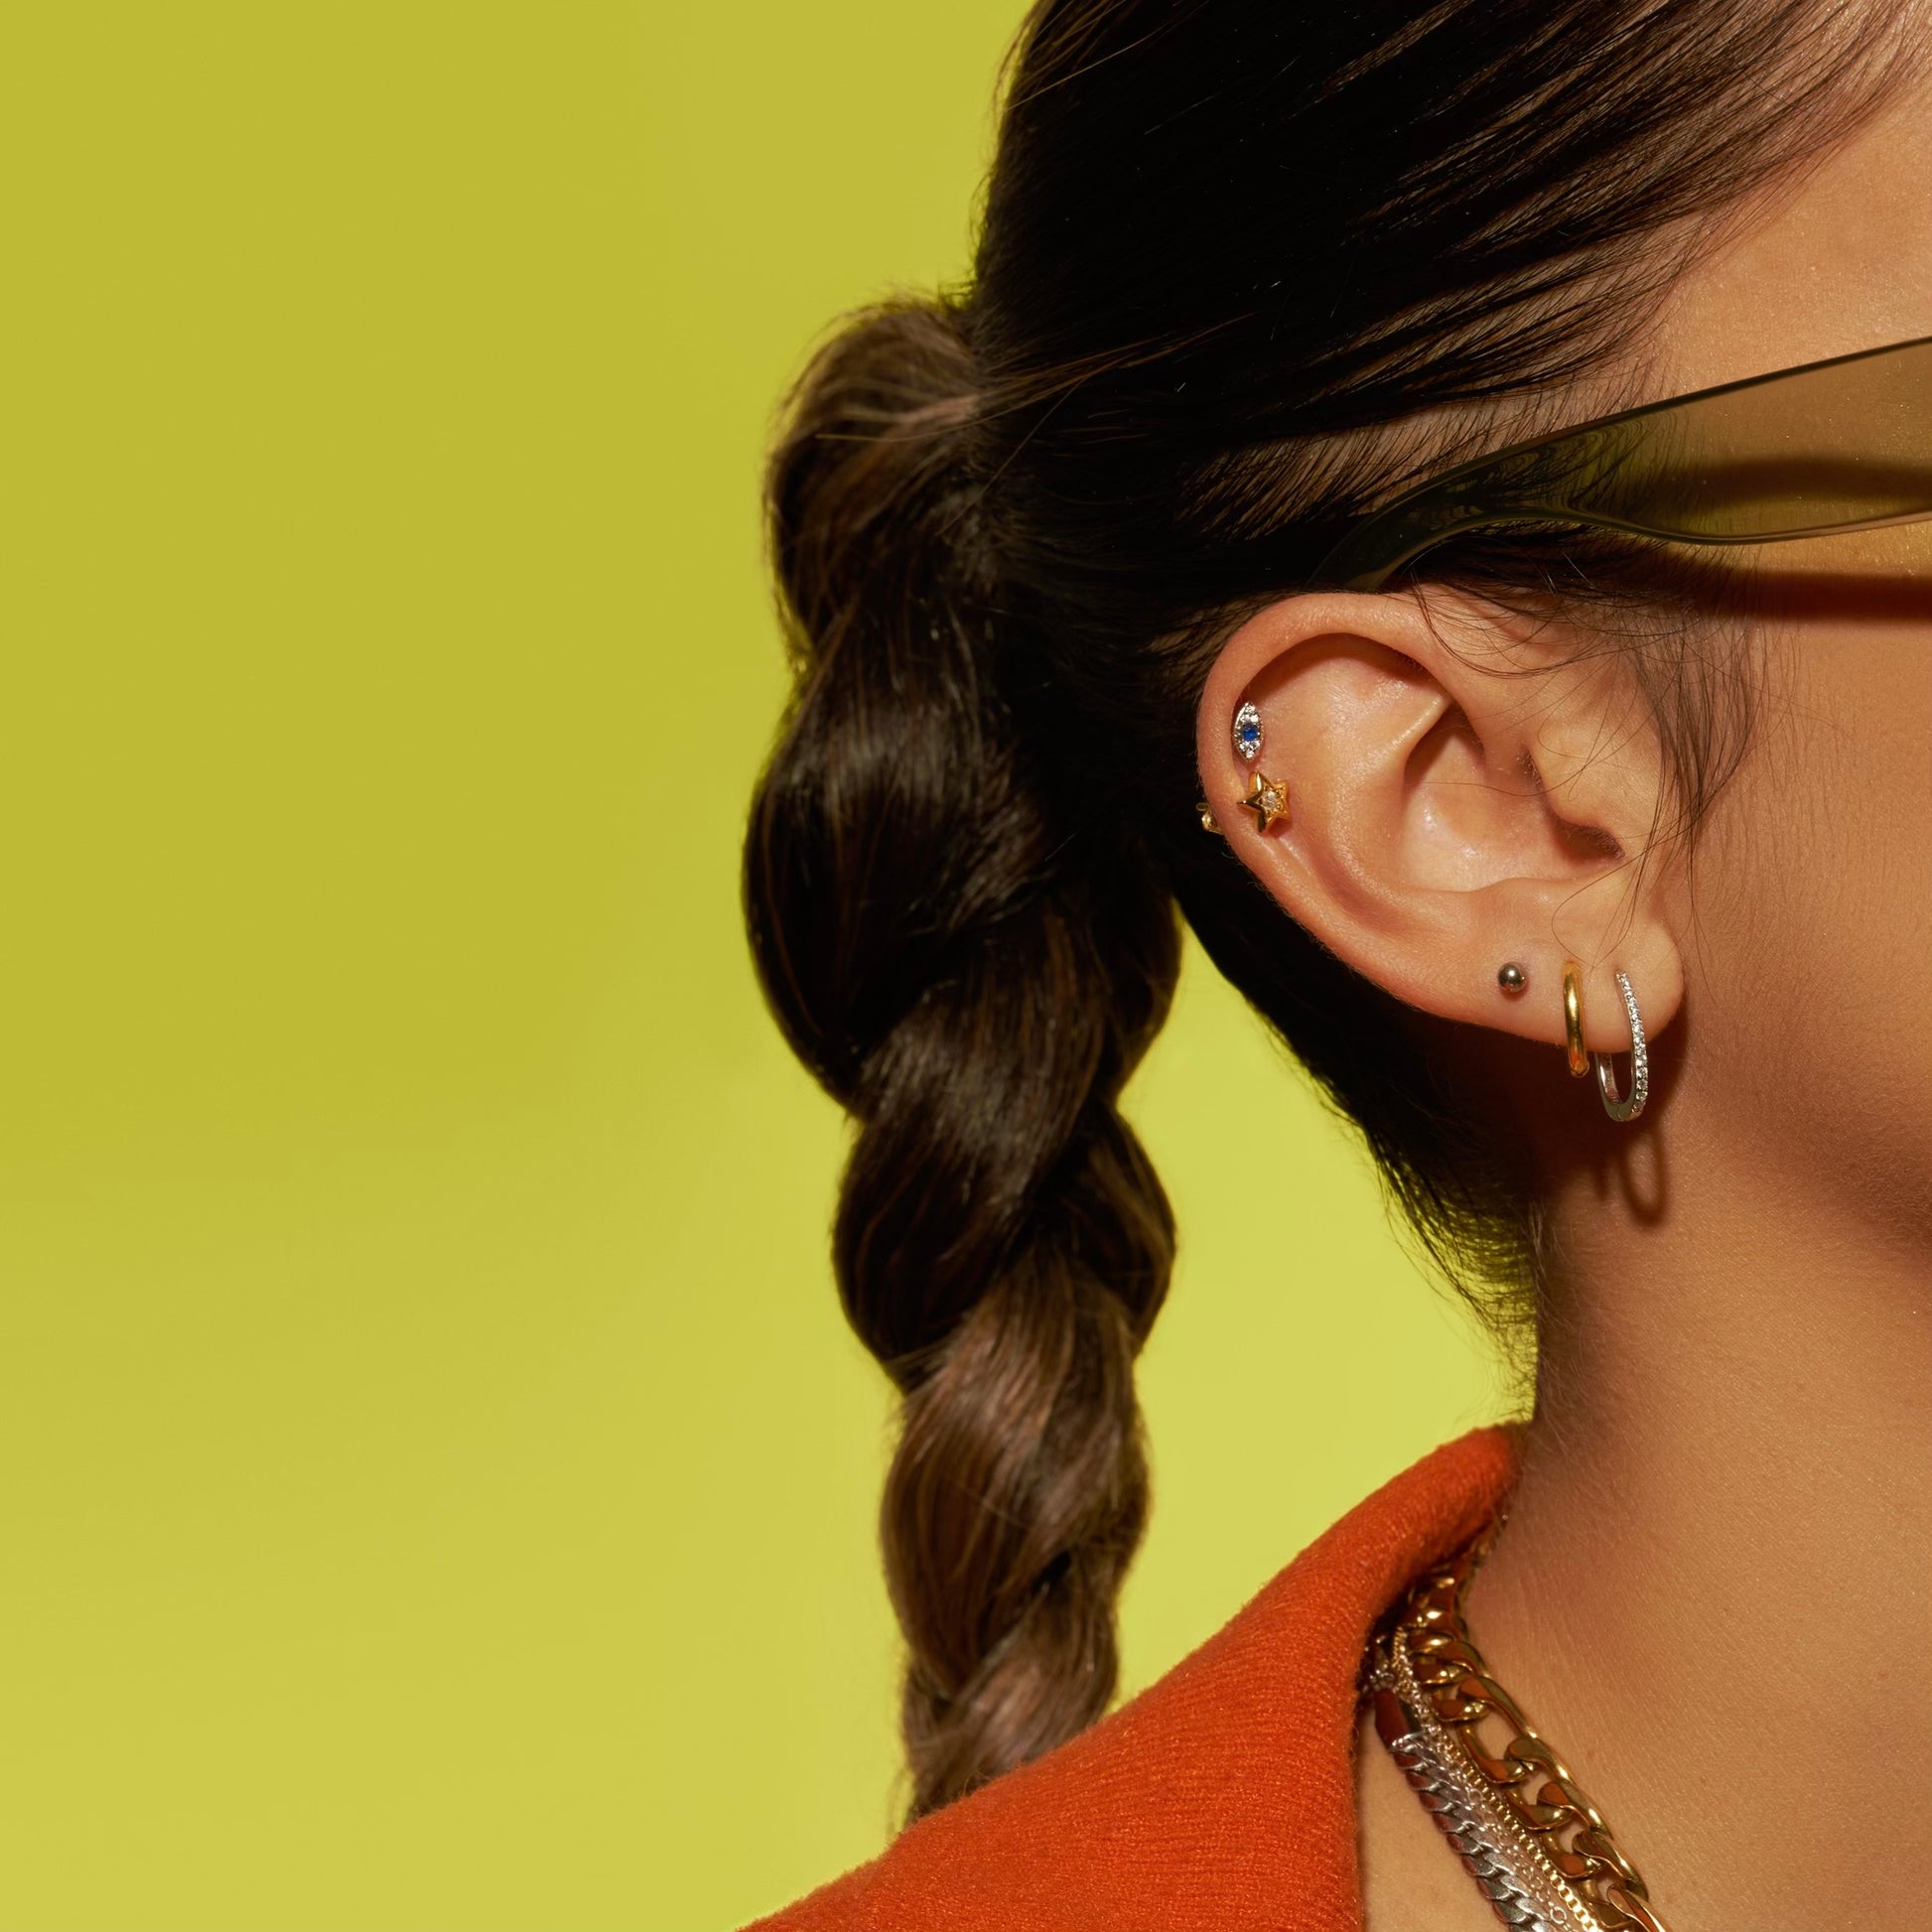 green background with model showing off her ear stack. orange shirt, braided hair. APT. 144 Jewelry Studio